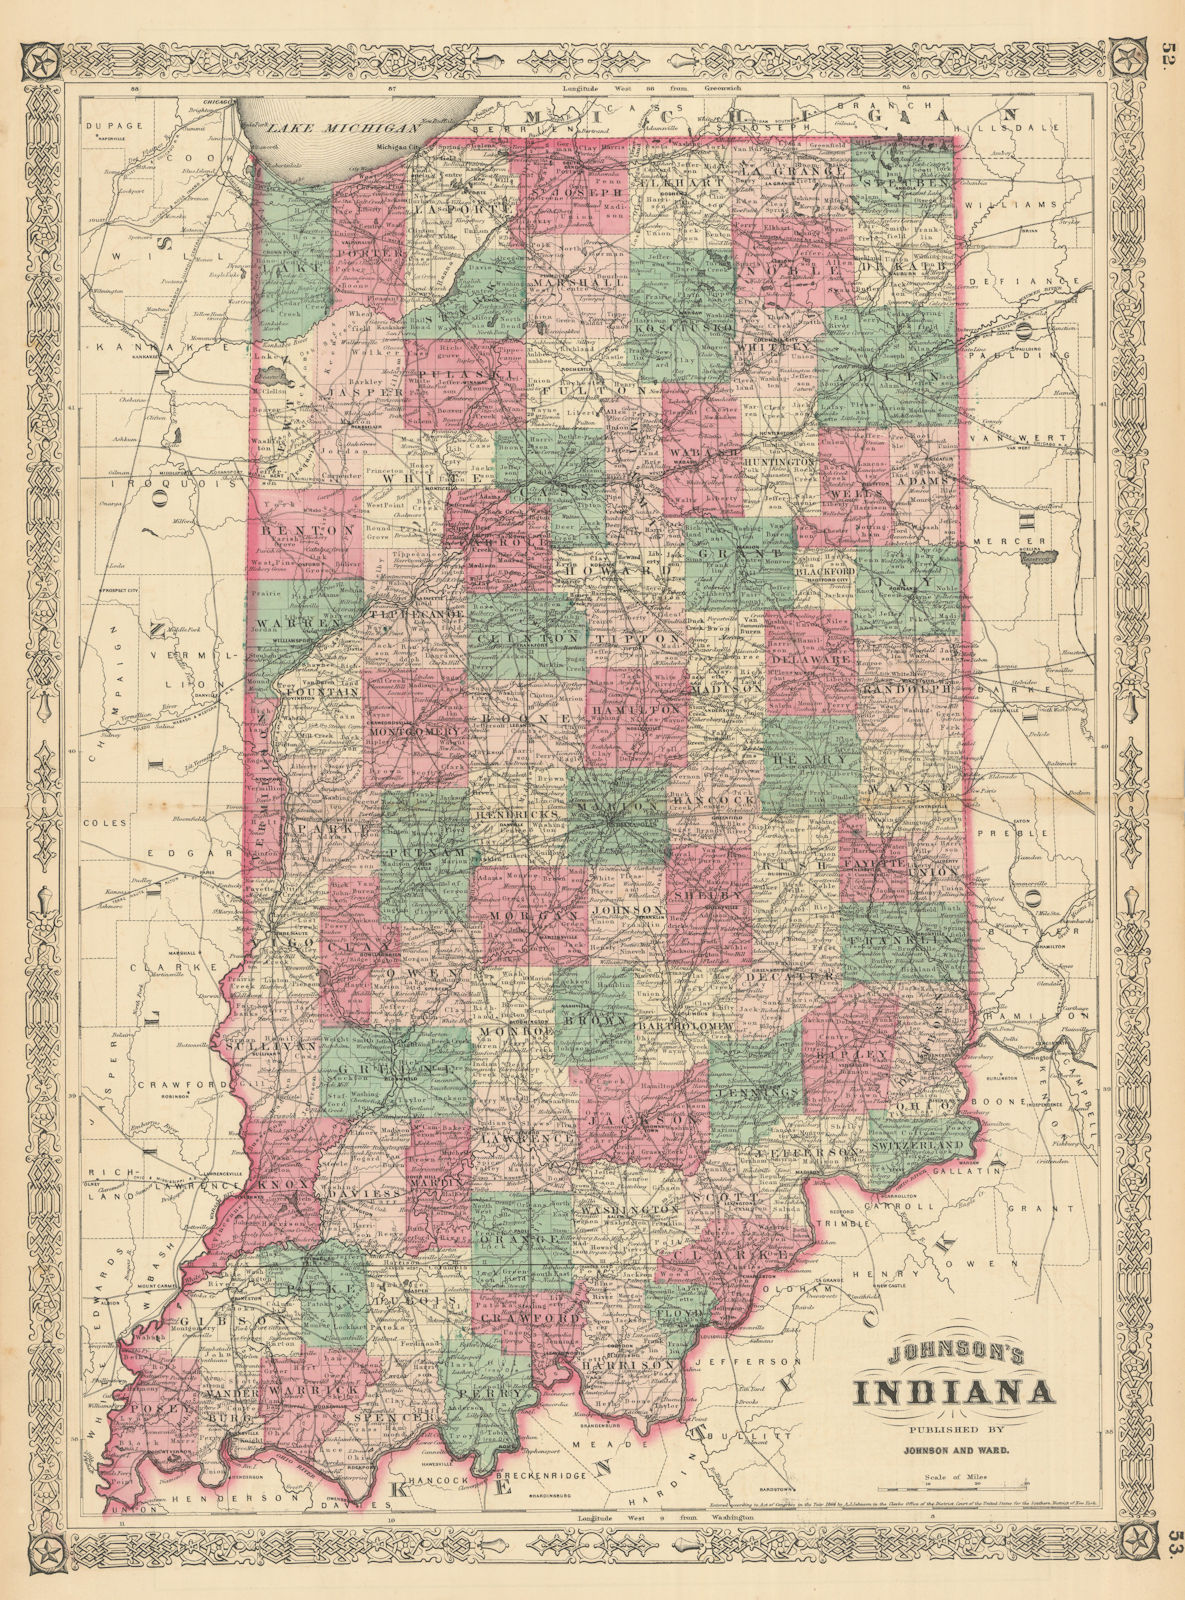 Associate Product Johnson's Indiana. US state map showing counties 1866 old antique chart